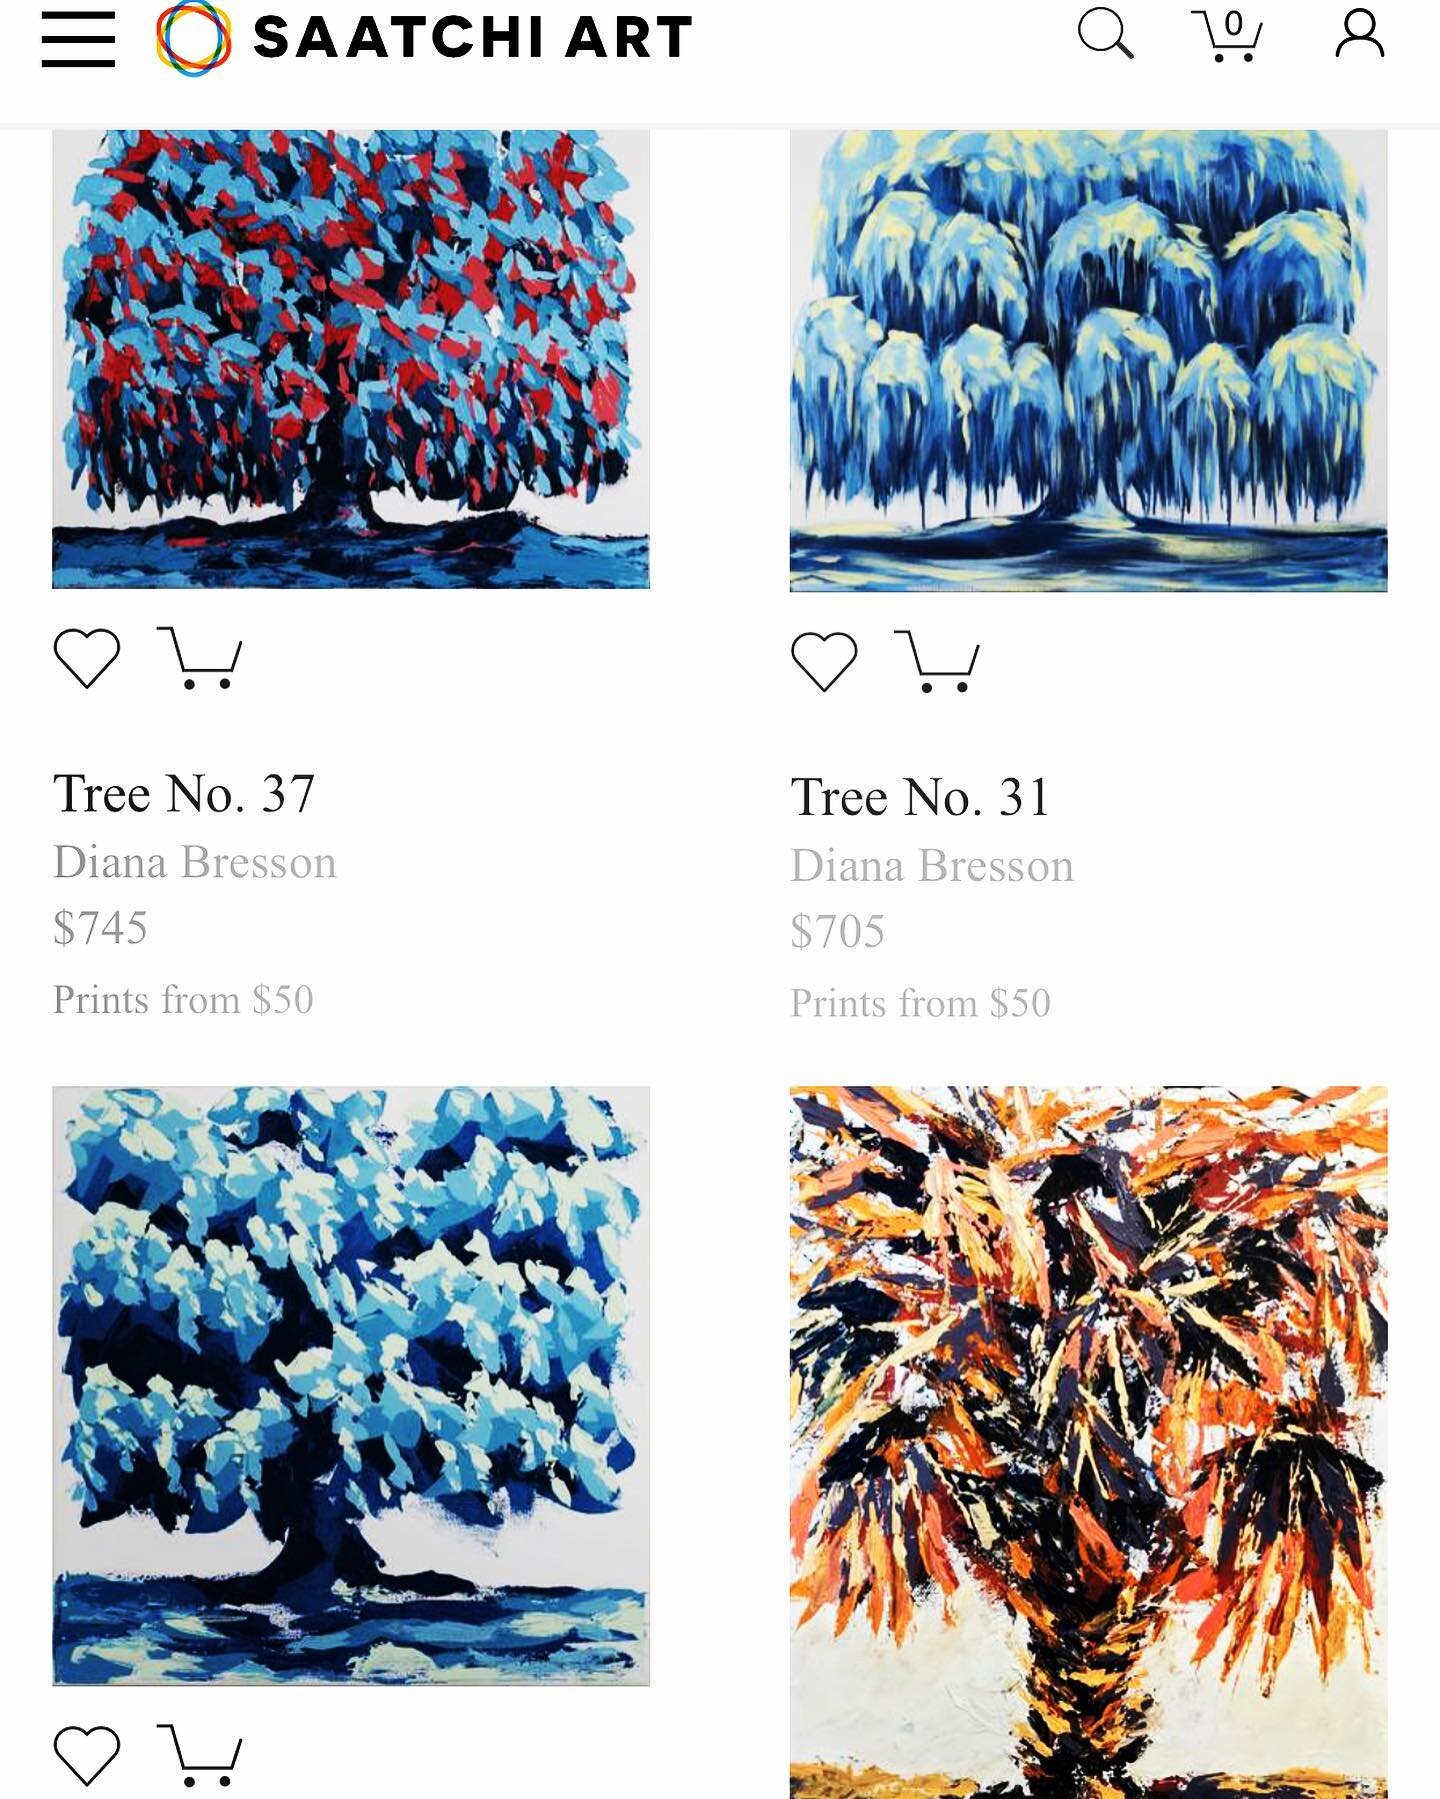 my art is now live on Saatchi Art! Prints are available 🔥🔥🔥
Link in profile

#art #femaleartist #prints #treeart #painting #chsartist #saatchiart #painter #supportsmallbusiness